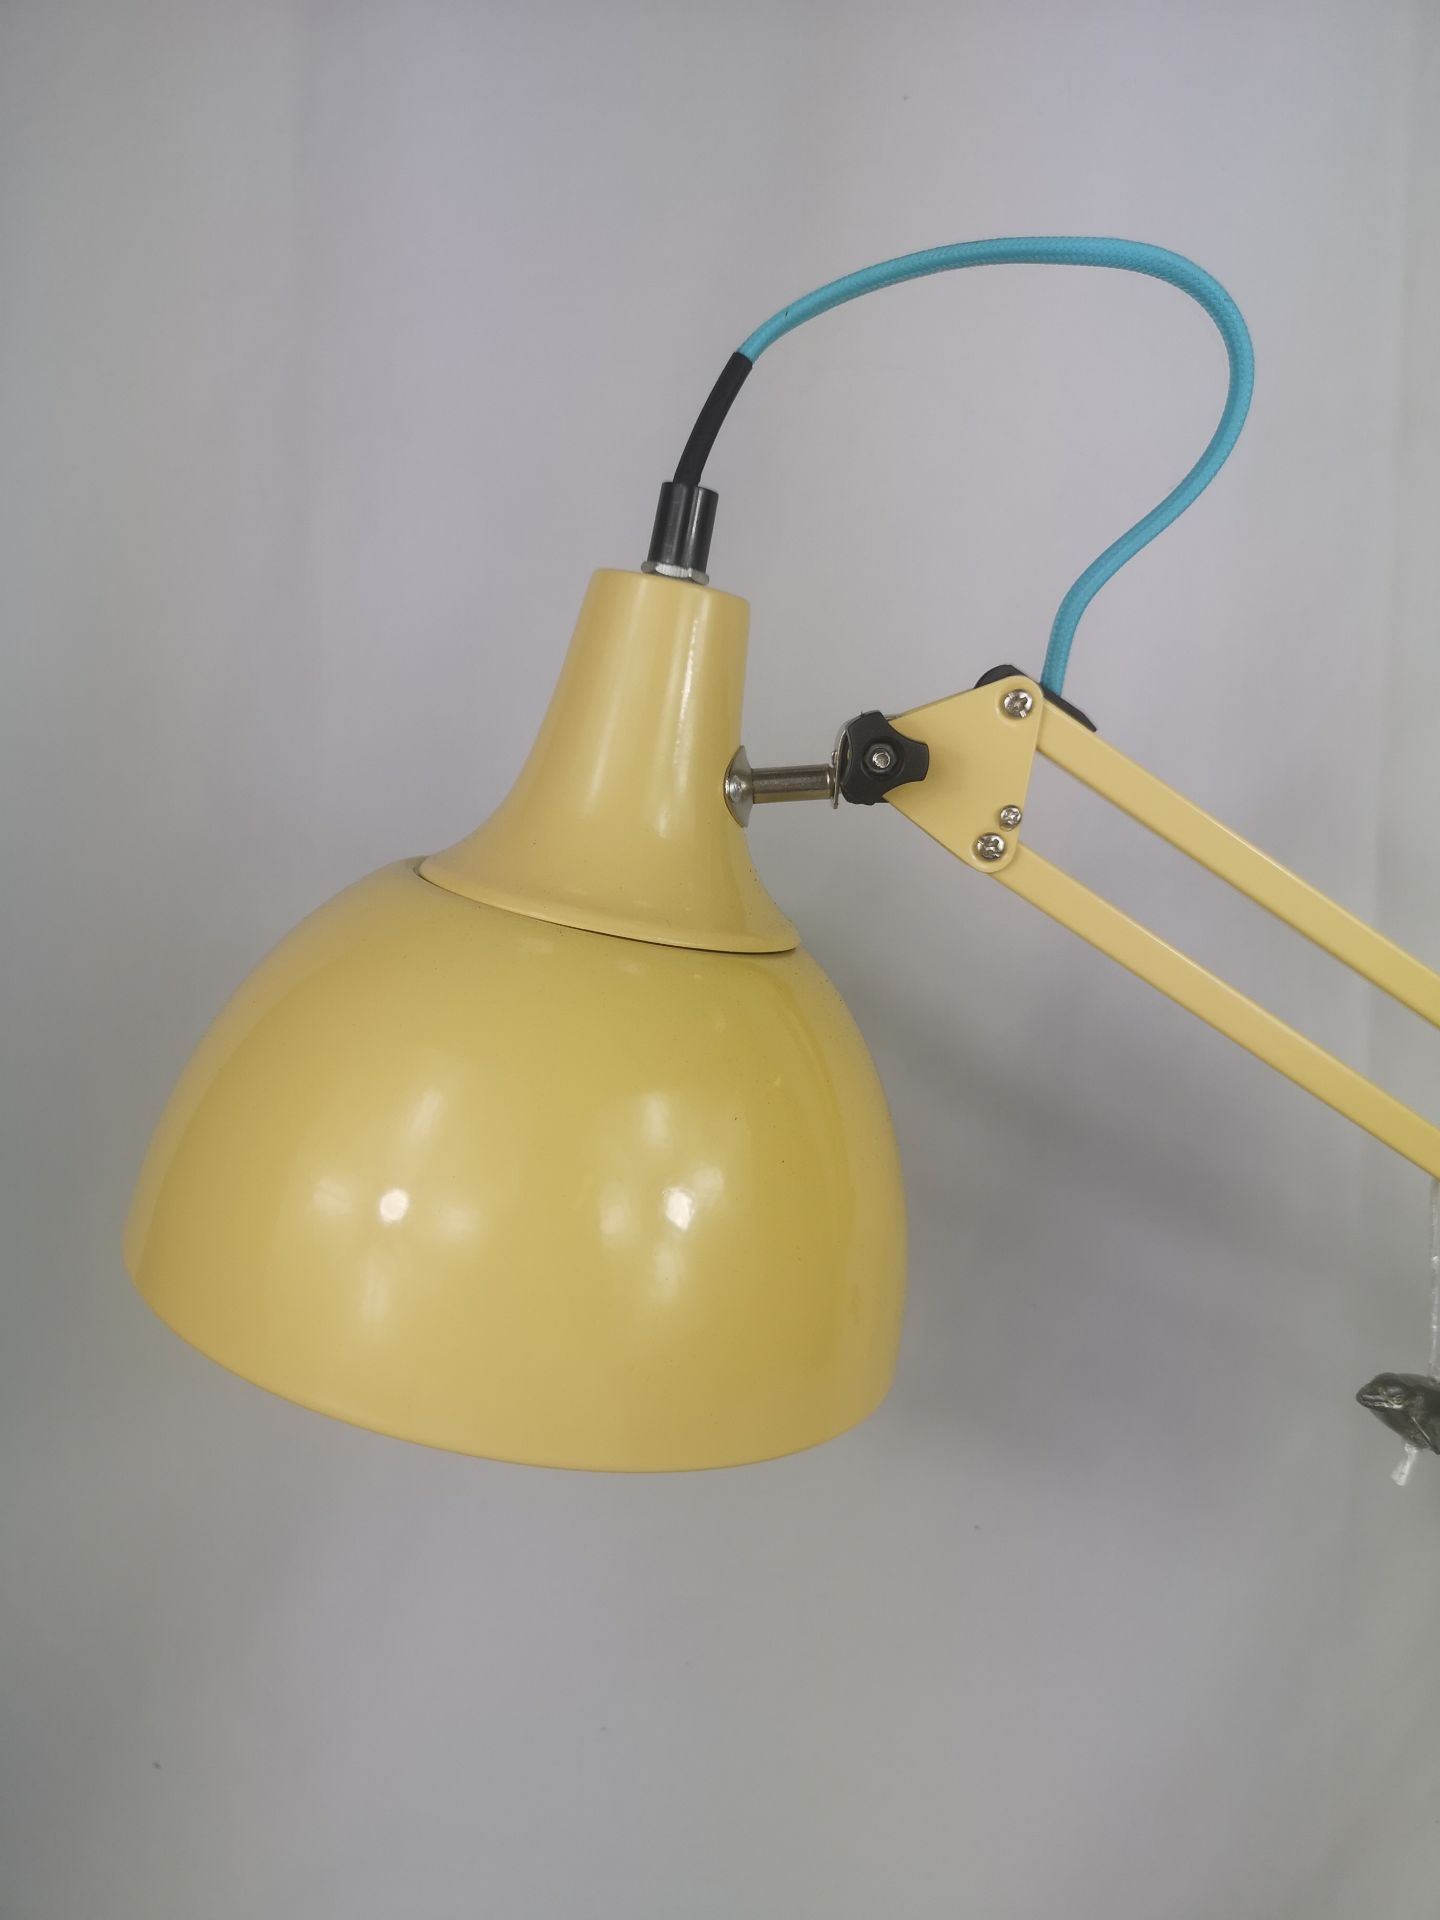 Adjustable anglepoise style desk lamp, - Image 2 of 5